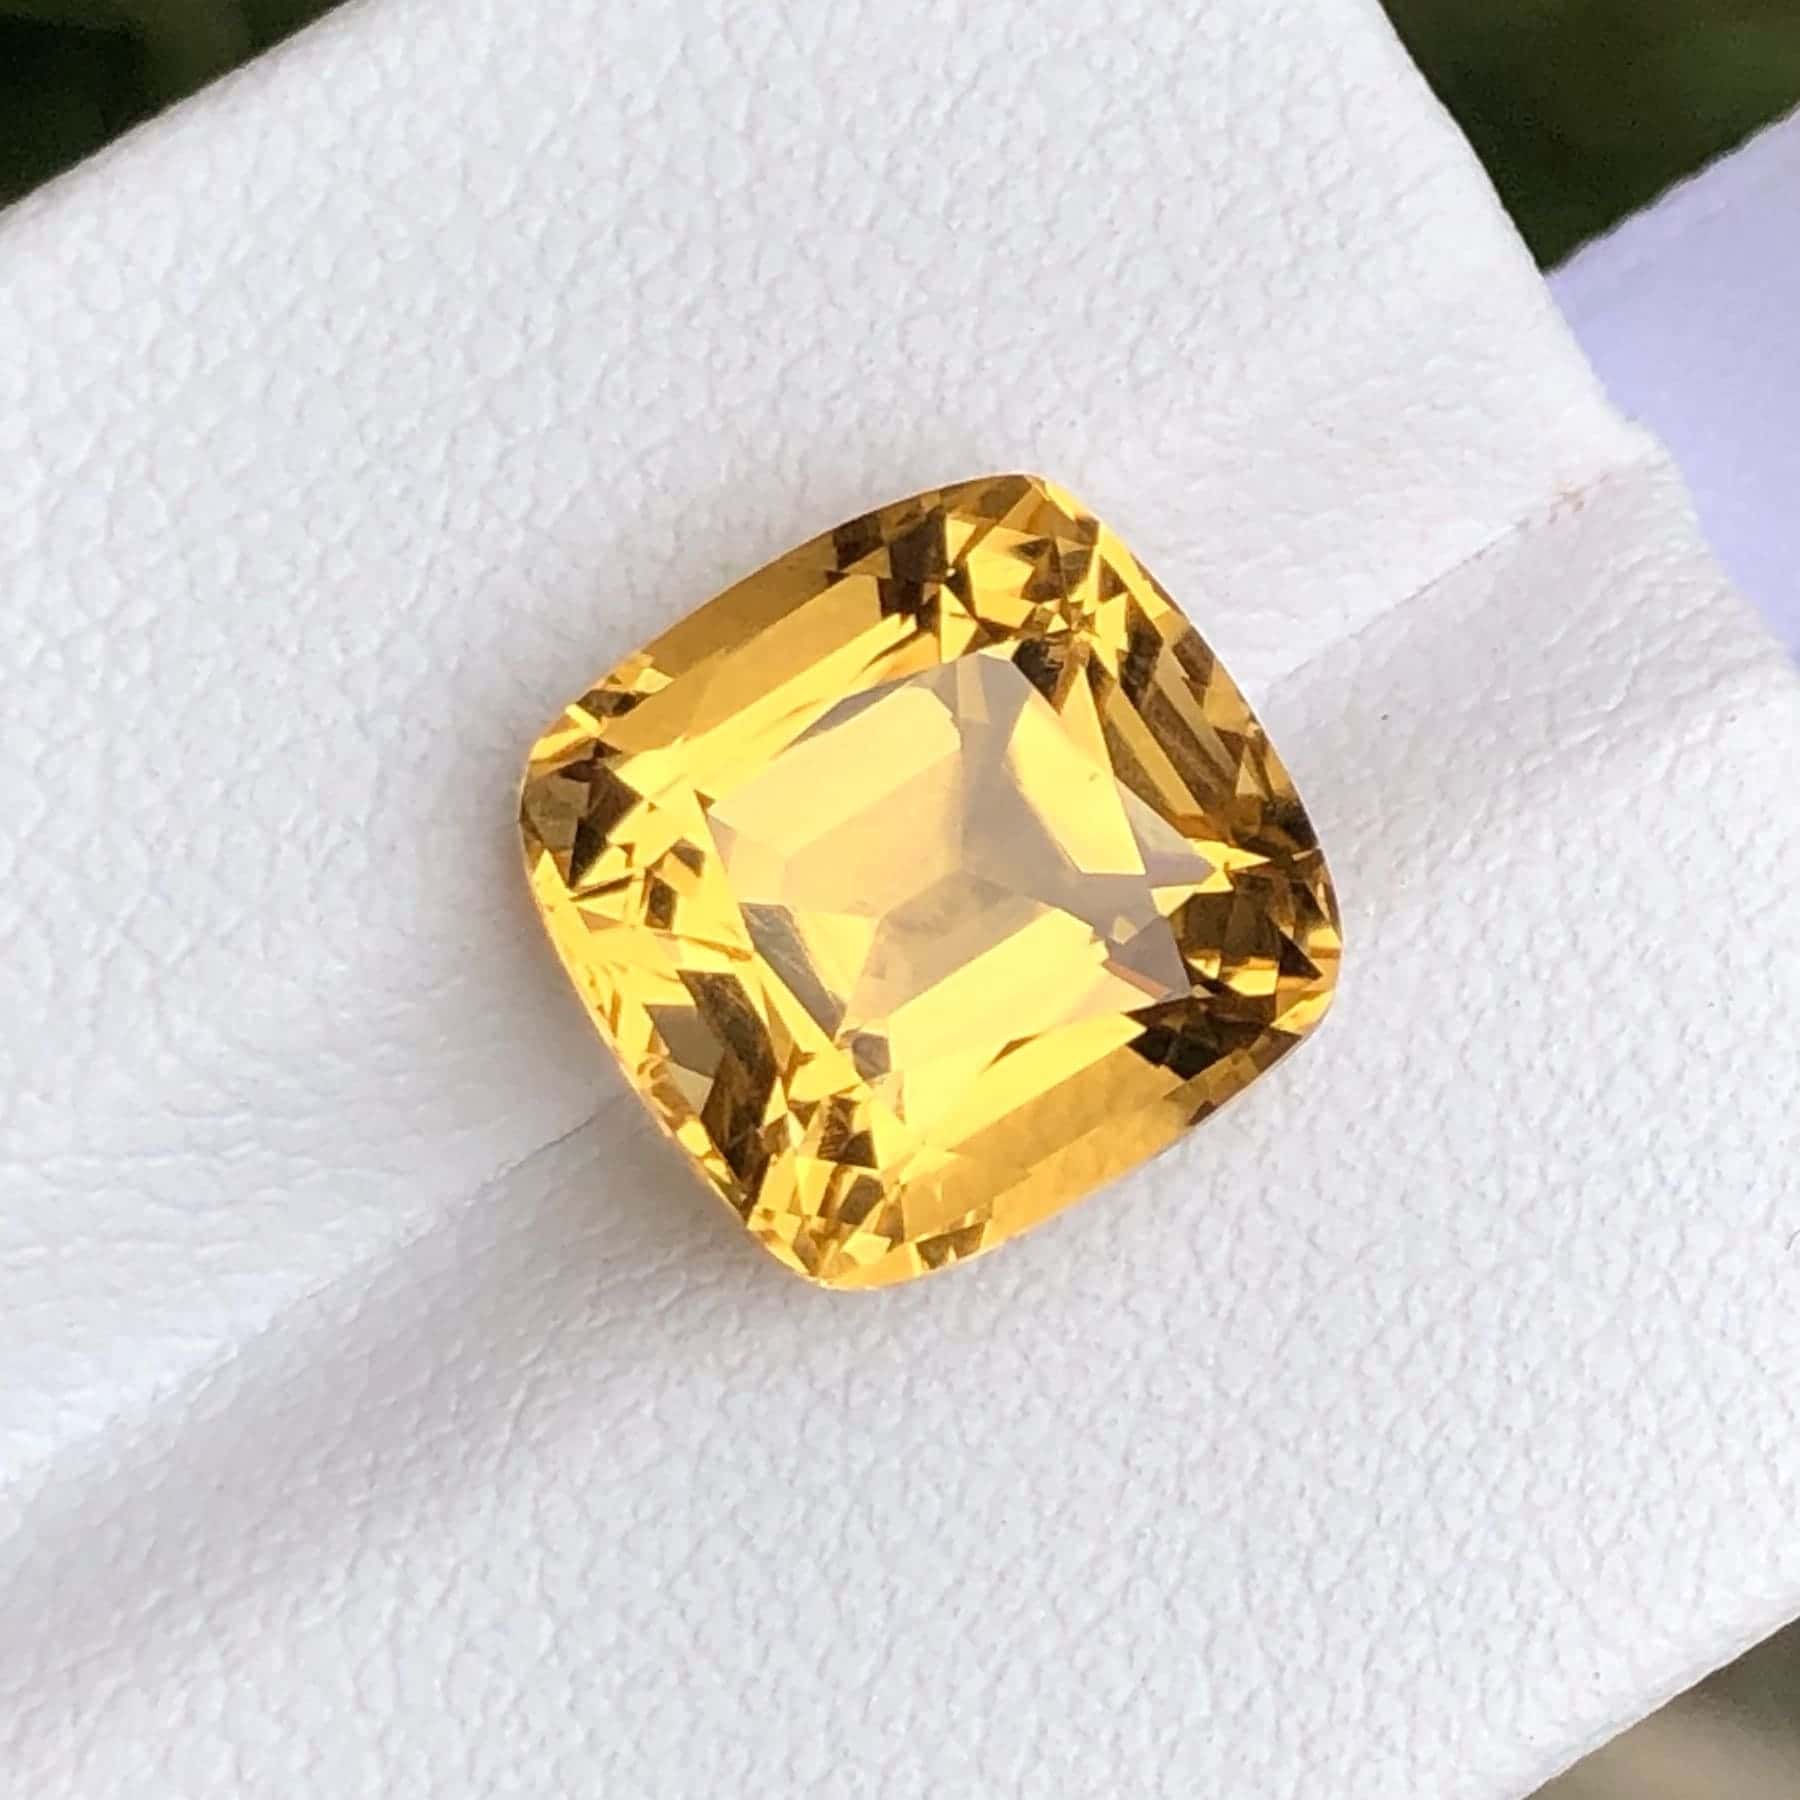 5.45 carats Gorgeous Loose Citrine Gemstone from Brazil